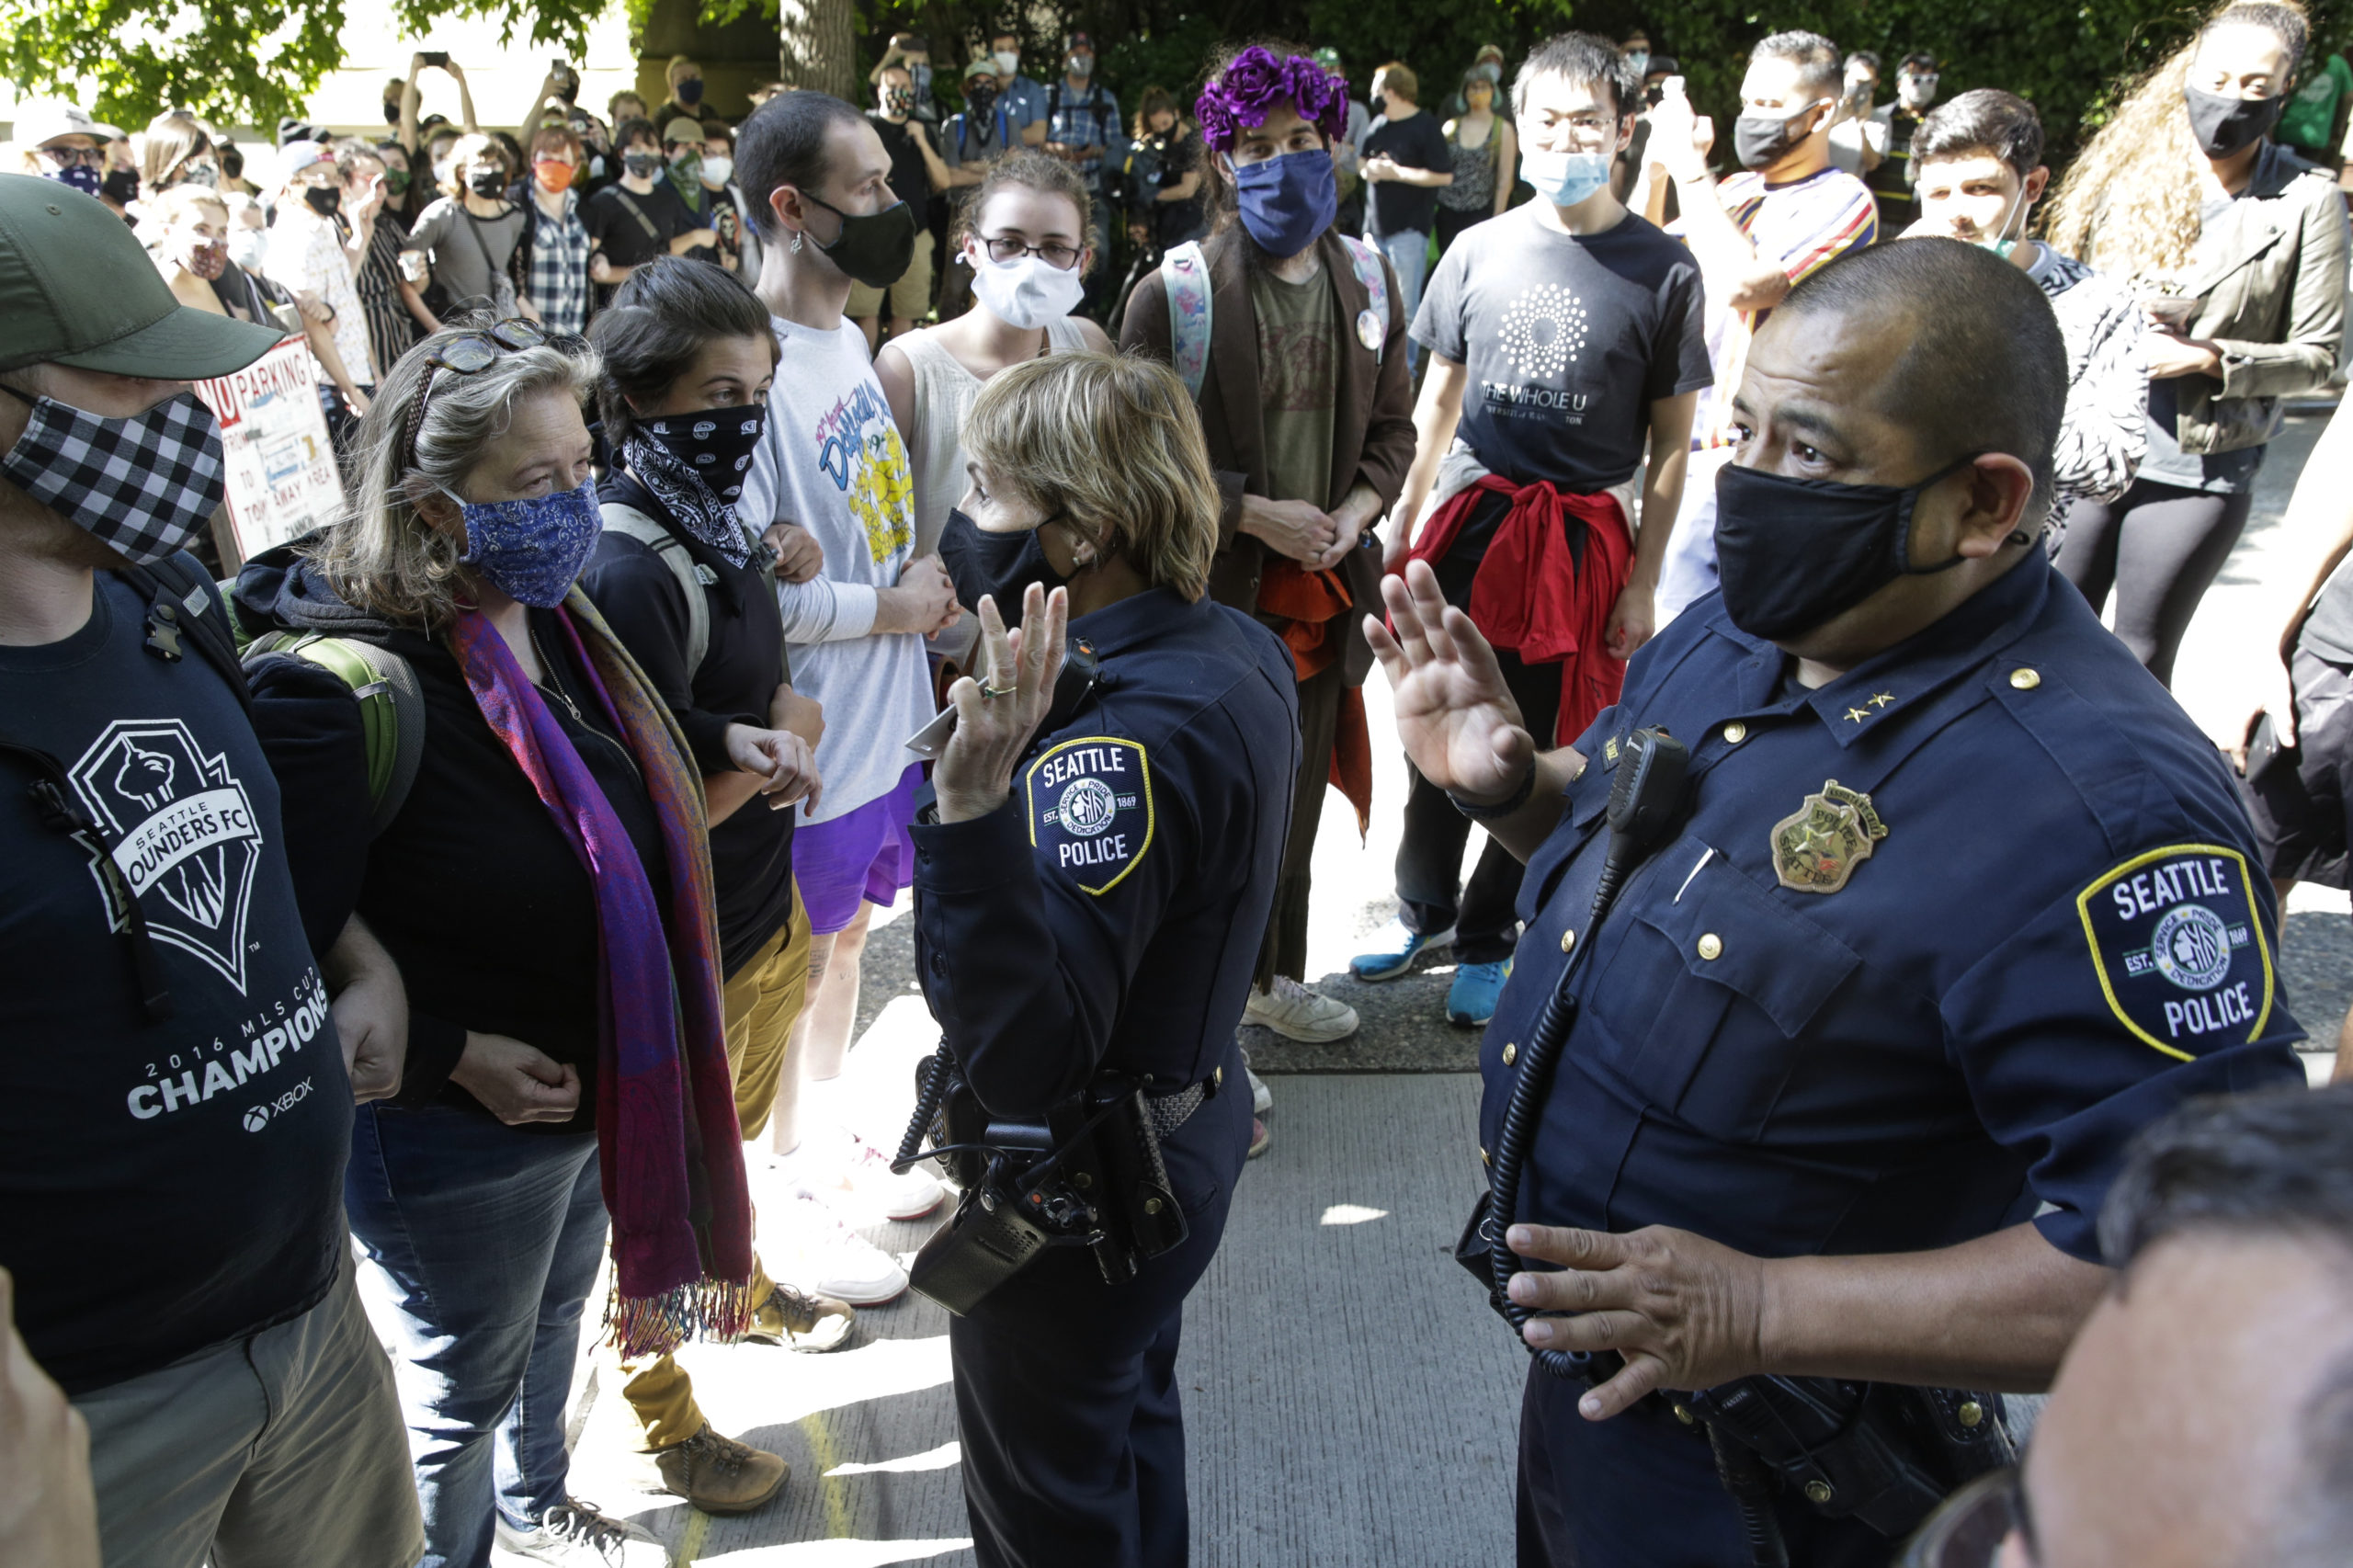 TOPSHOT - Seattle Police Assistant Chief Deanna Nollette and Assistant Chief Adrian Diaz are blocked by protesters from entering the newly created Capitol Hill Autonomous Zone (CHAZ) in Seattle, Washington on June 11, 2020. - Two police officers attempt to enter the area, but are blocked by people standing close together and holding cameras as they film. The area surrounding the East Precinct building has come to be known as the CHAZ, Capitol Hill Autonomous Zone. (Photo by Jason Redmond / AFP) (Photo by JASON REDMOND/AFP via Getty Images)